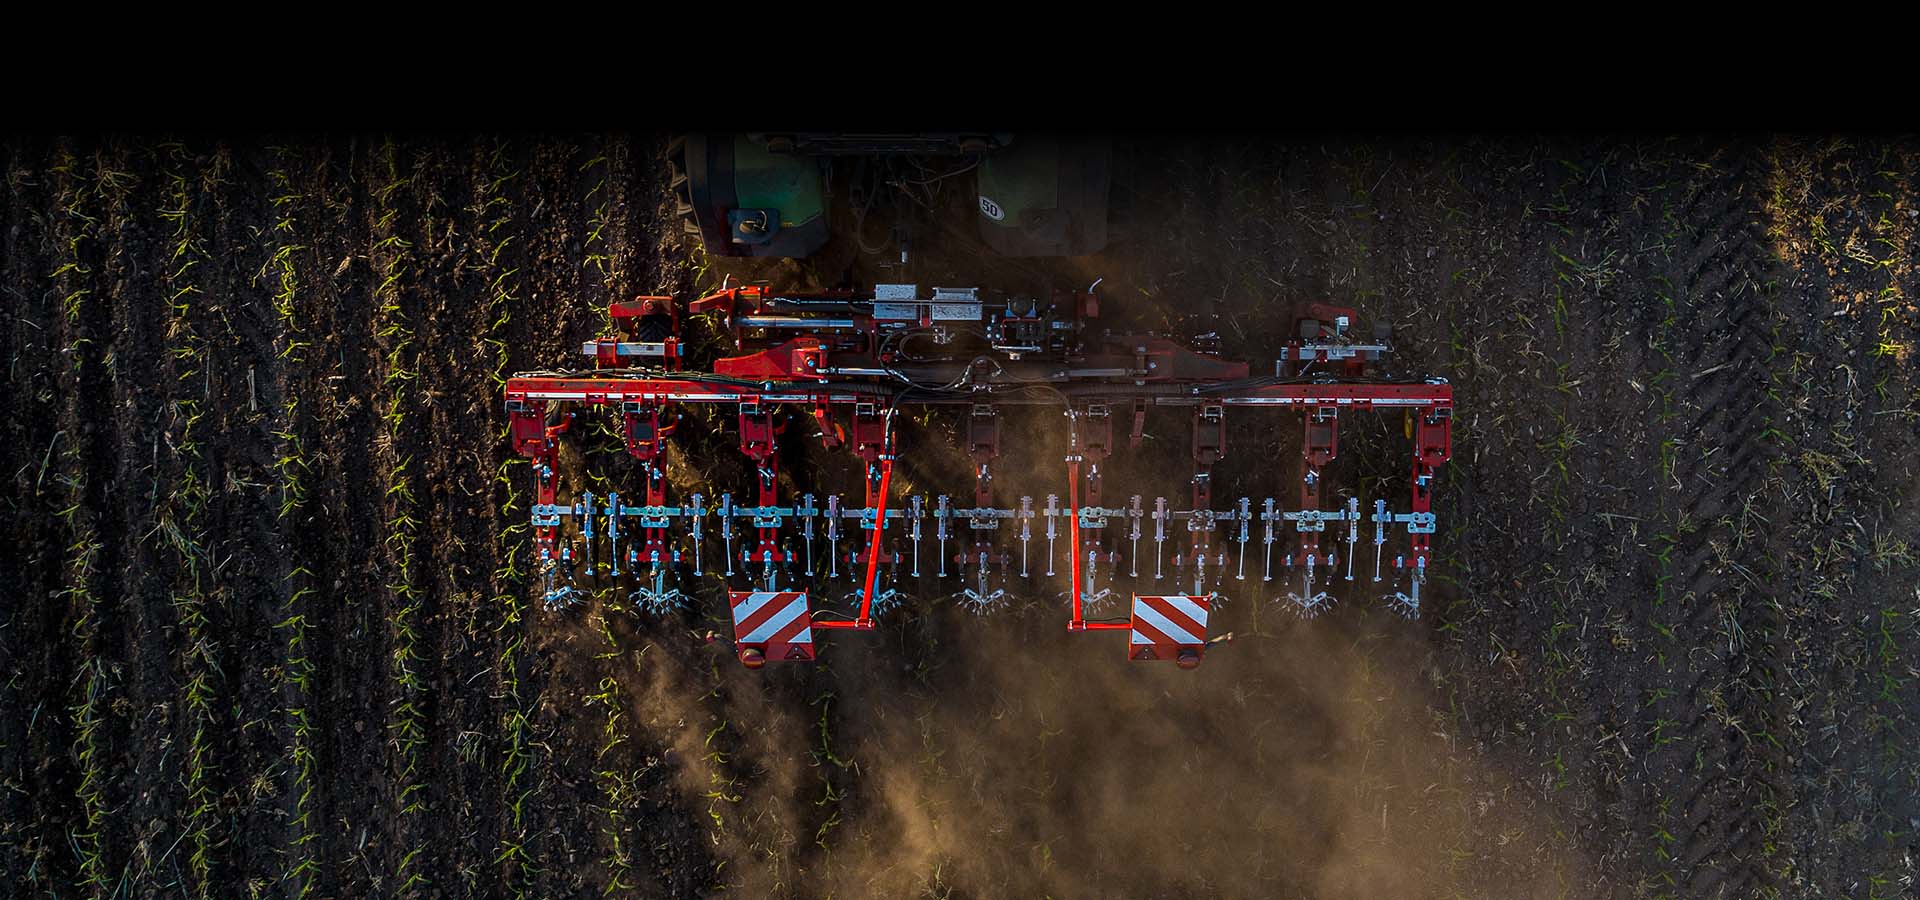 Extract inter-row cultivator in red